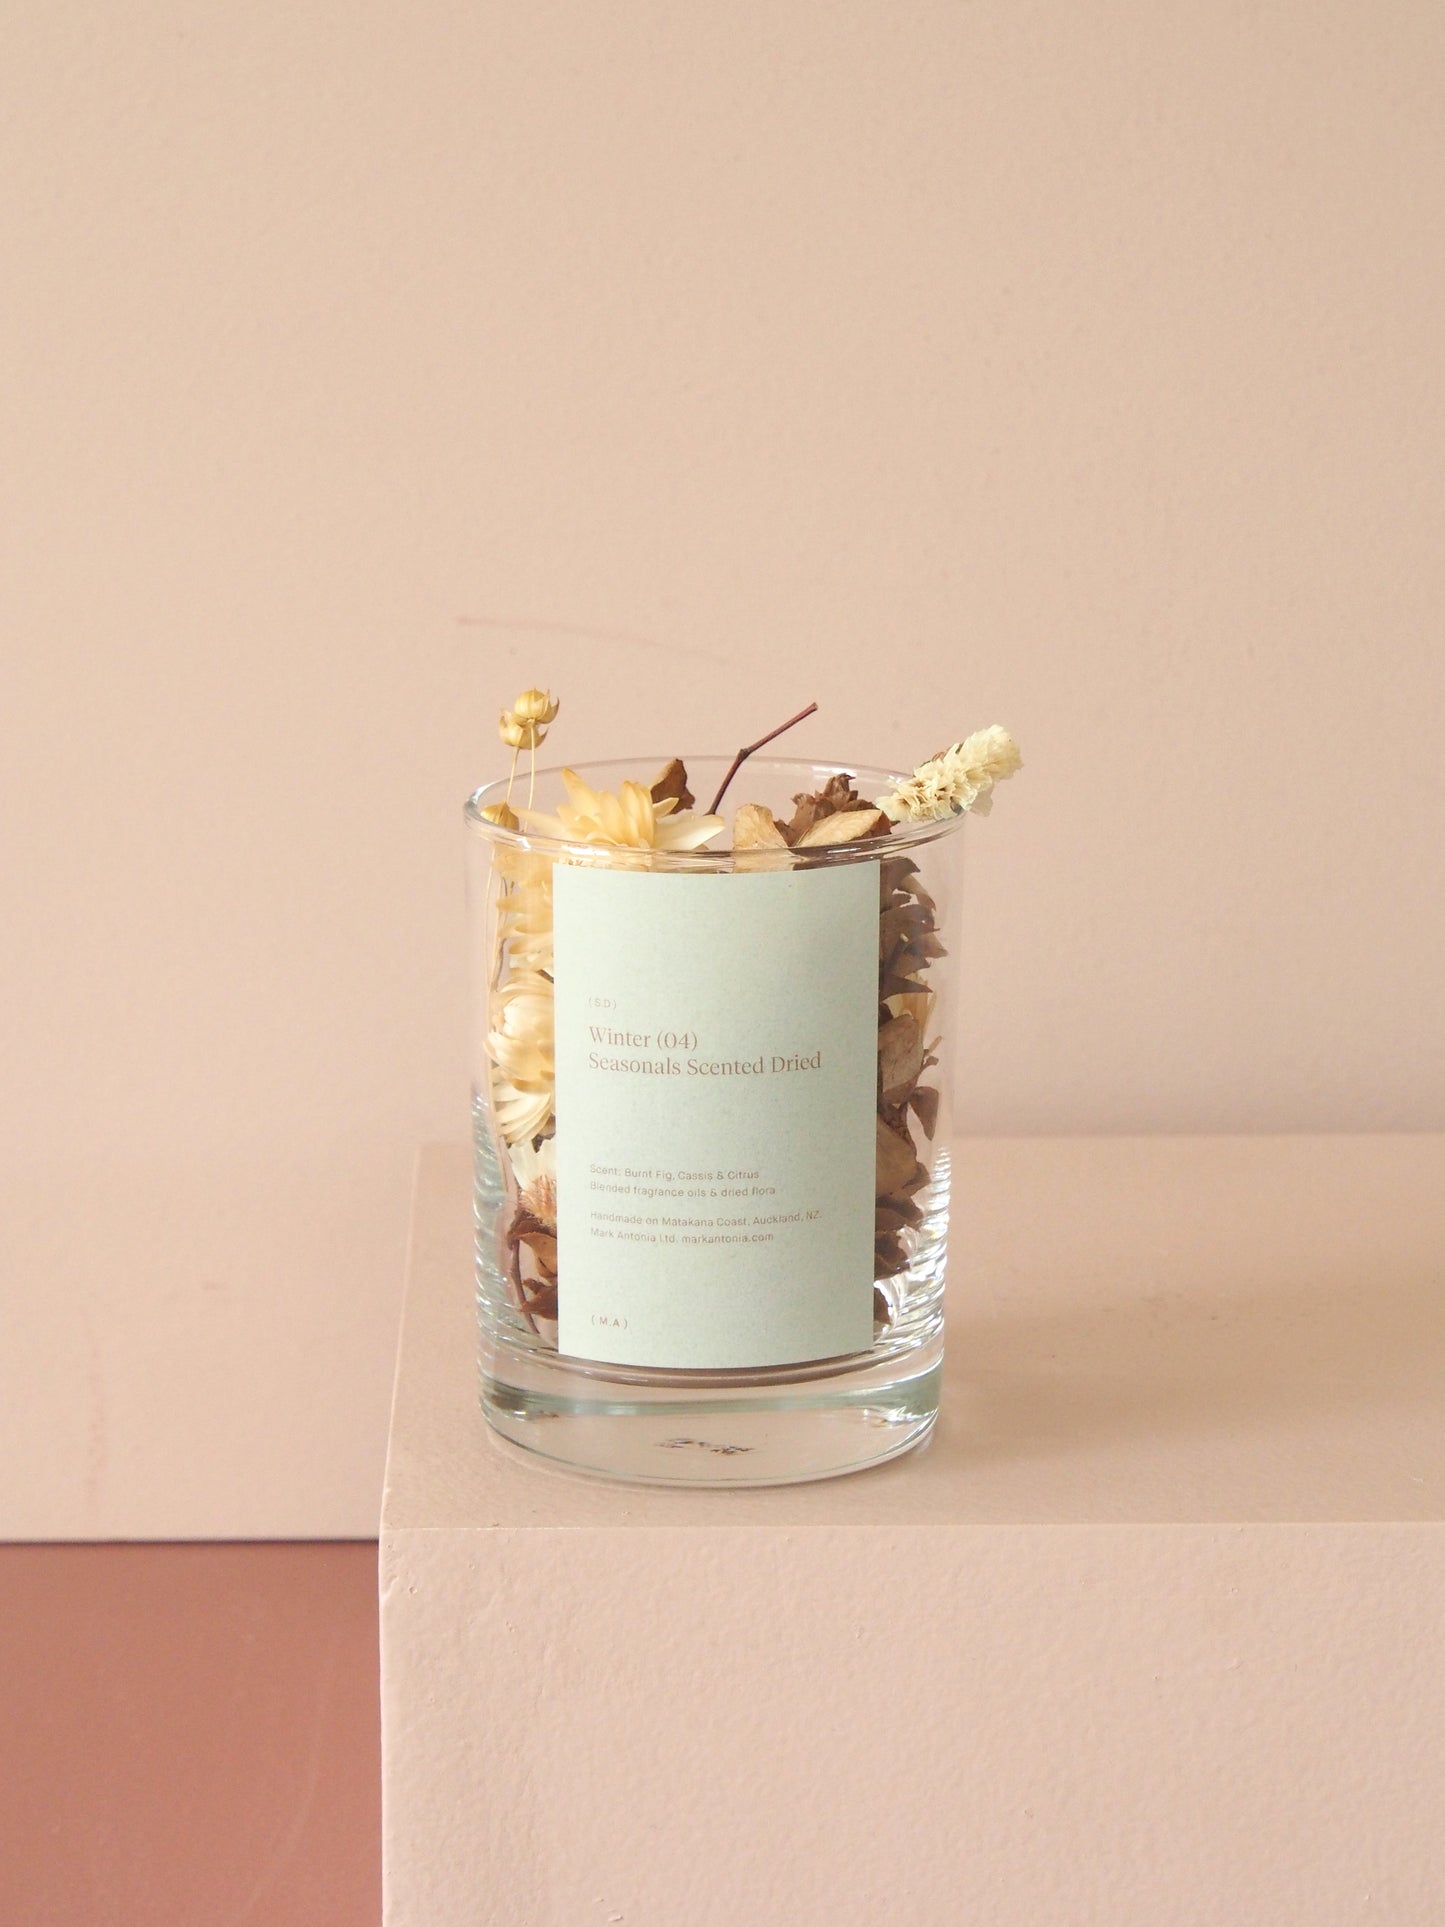 Seasonals Scented Dried - Winter